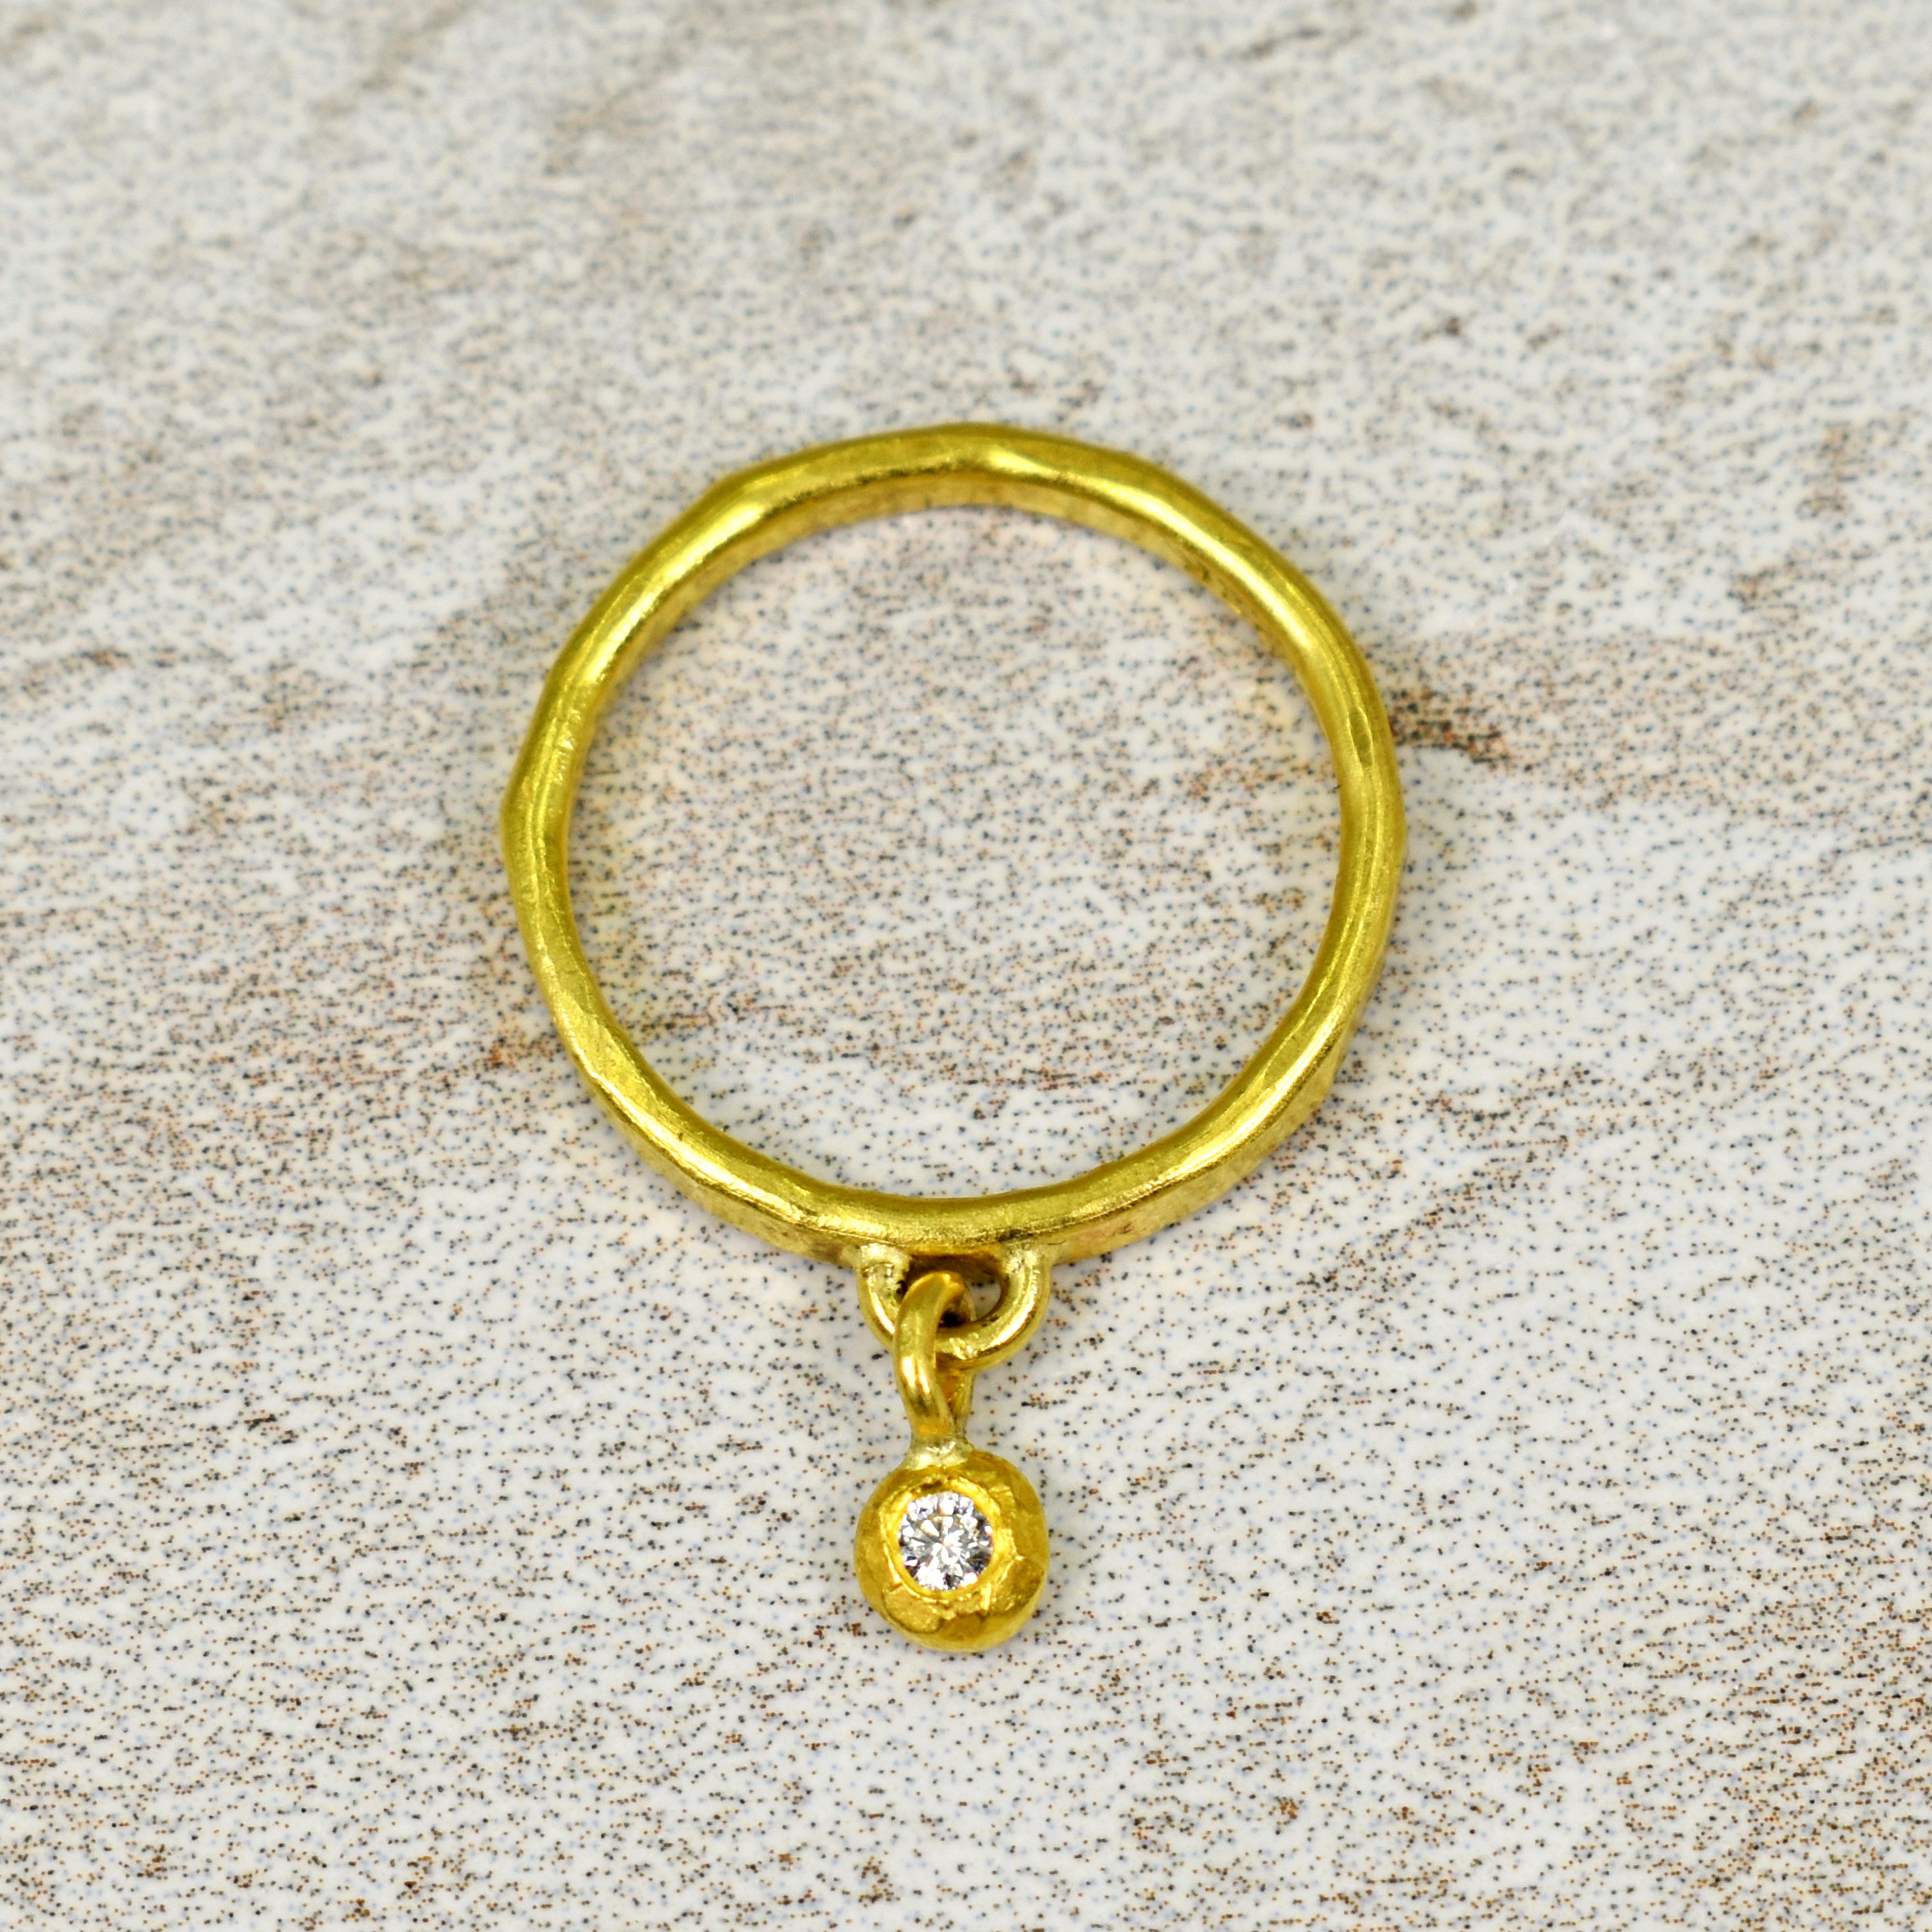 Hand-forged, hammered 22k yellow gold ring with 2mm white Diamond charm. Size 7. Ring band is 3mm wide and finished with a rustic texture. Perfect on its own or added to your ring stack. 